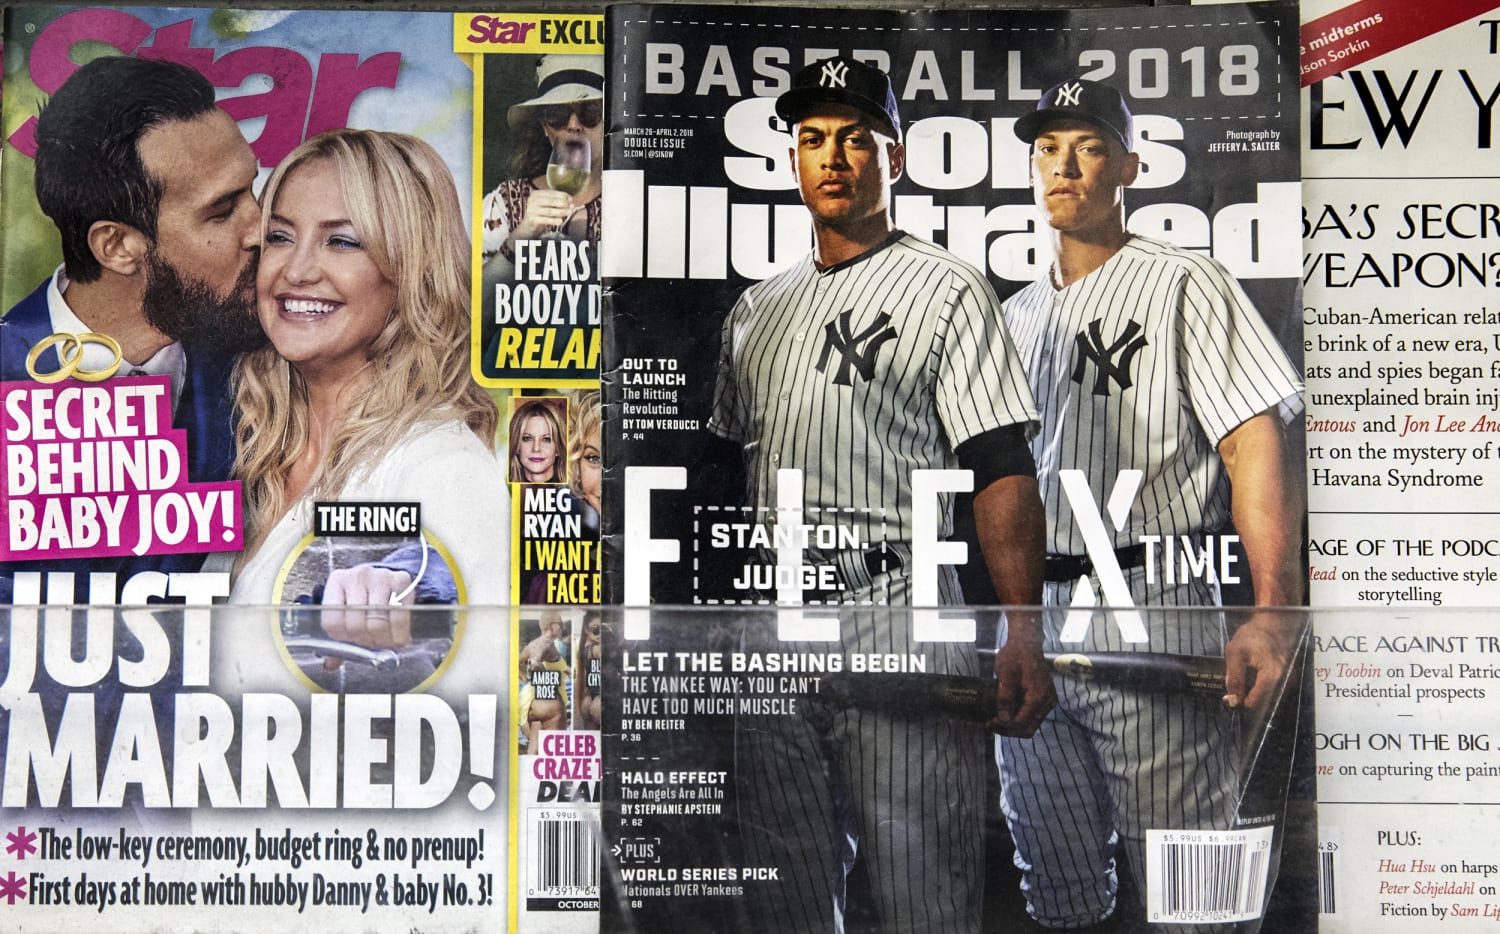 Sports Illustrated layoffs: Why this iconic magazine may be at the